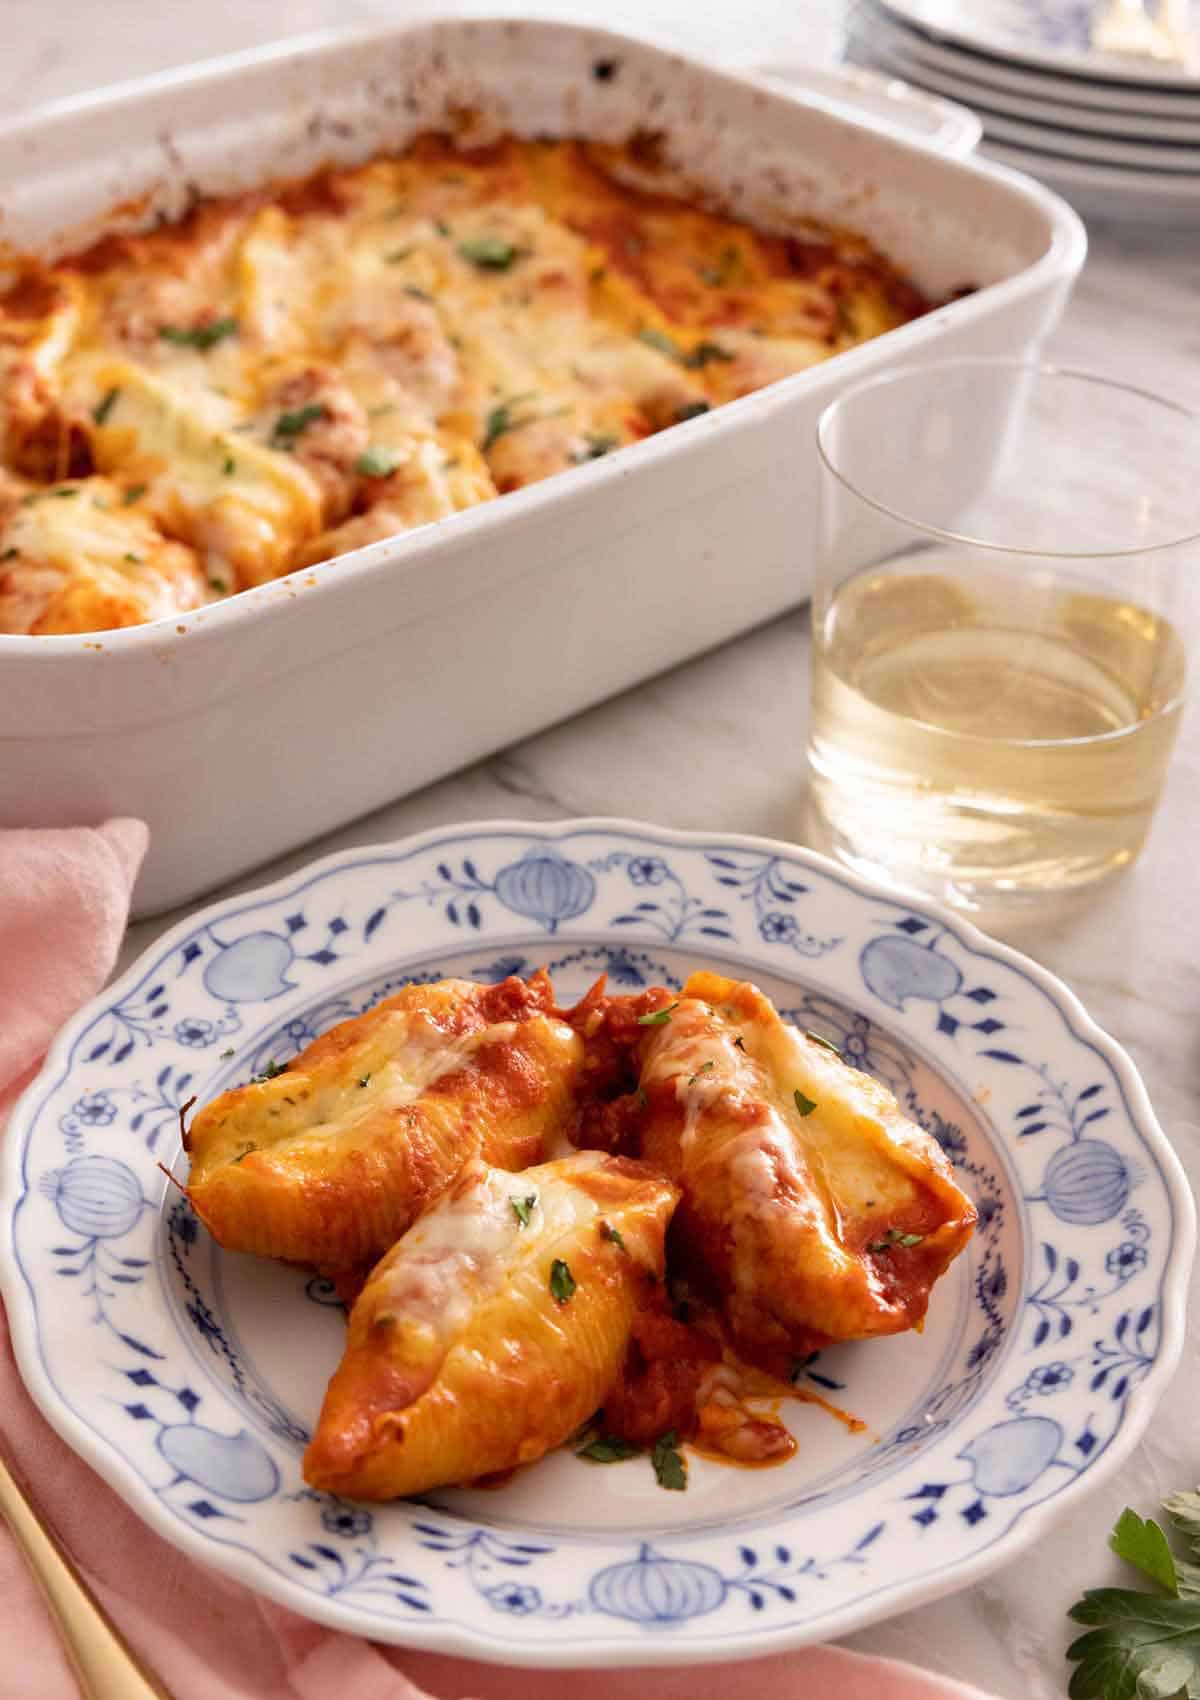 A plate with three stuffed shells by a glass of wine by a baking dish.